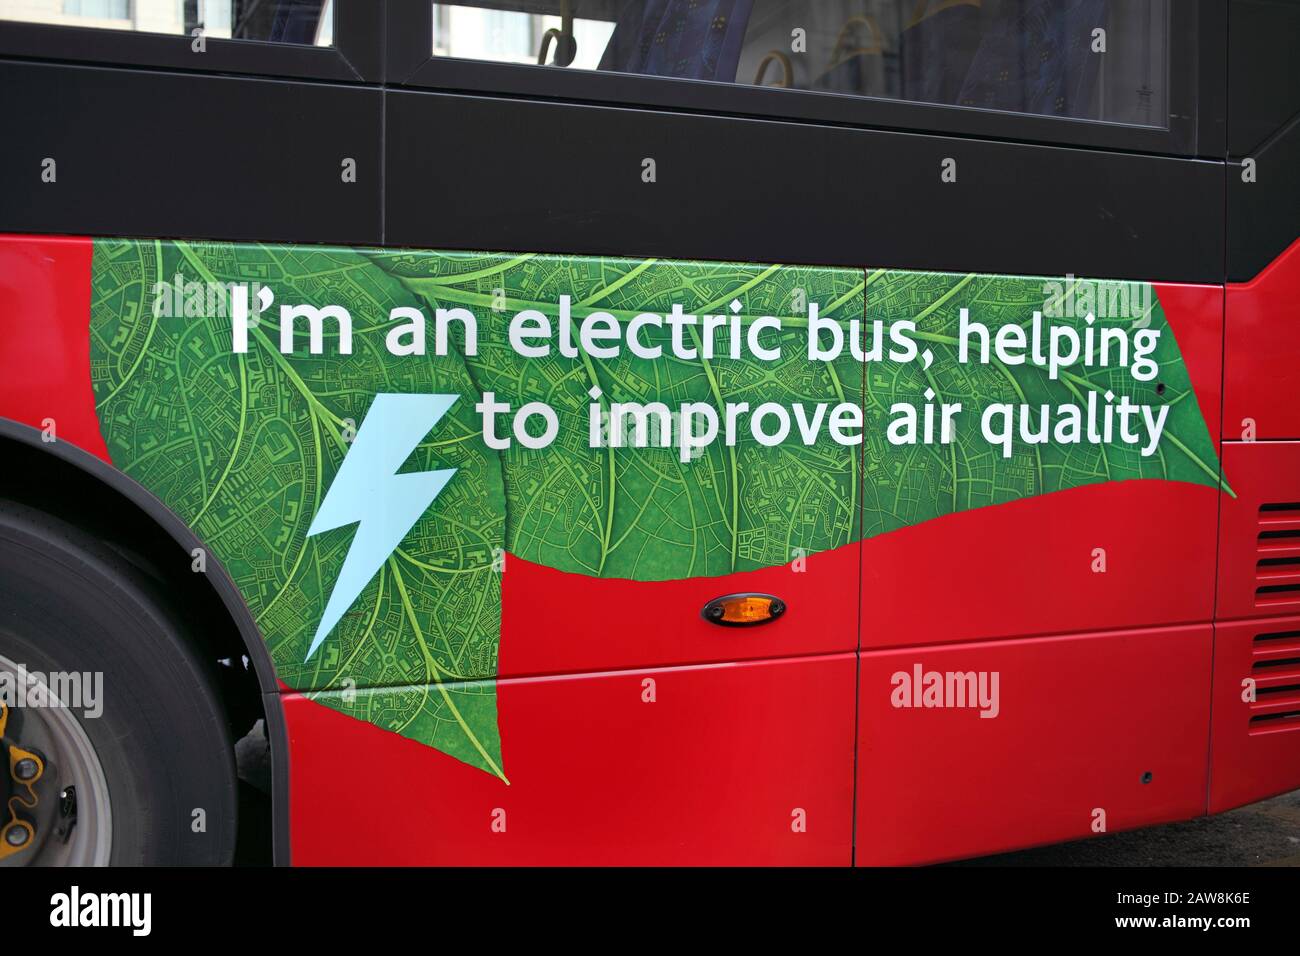 Advert on the side of an electric bus in London, publicising its role in improving air quality. Lancaster Place, London. Stock Photo